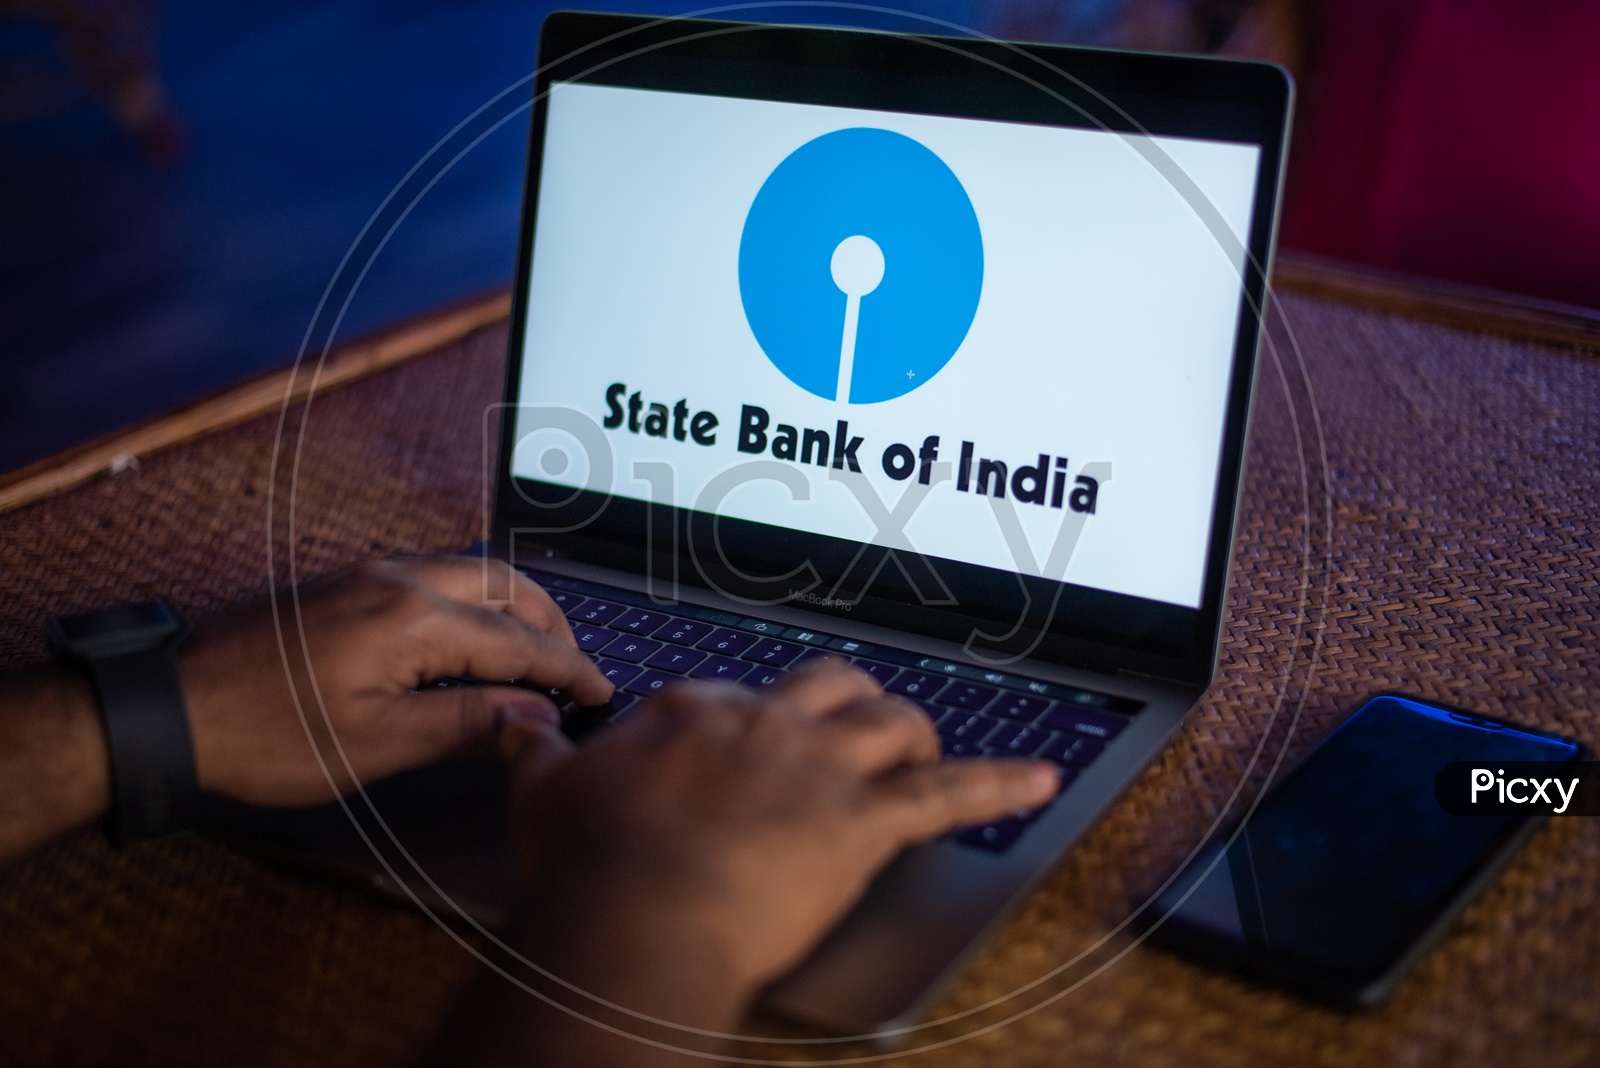 Indian Youth Accessing Online Banking Of State Bank Of India ( SBI ) in Laptop